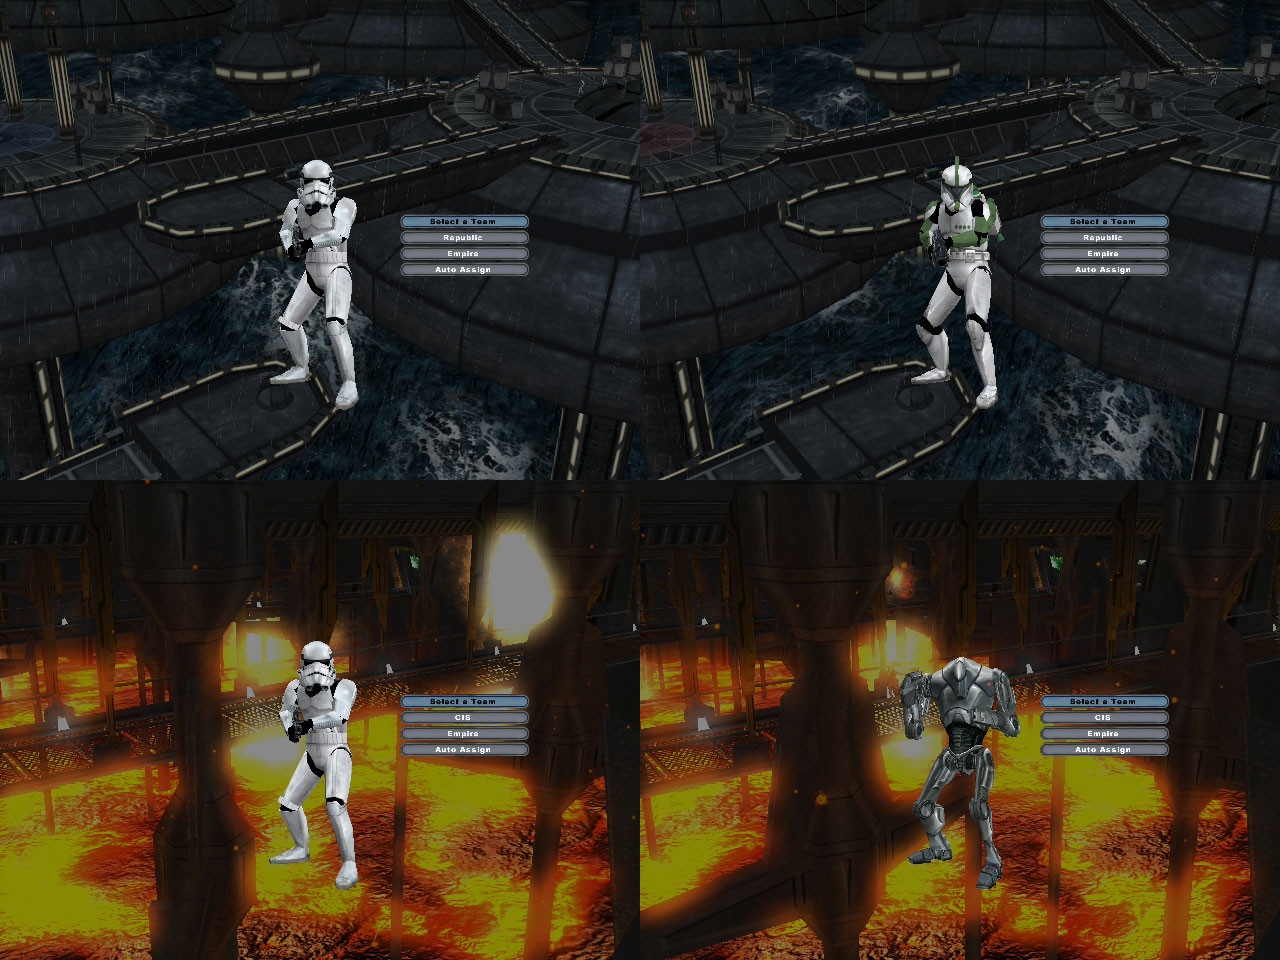 How to Install Star Wars Battlefront 2 2005 Mods 